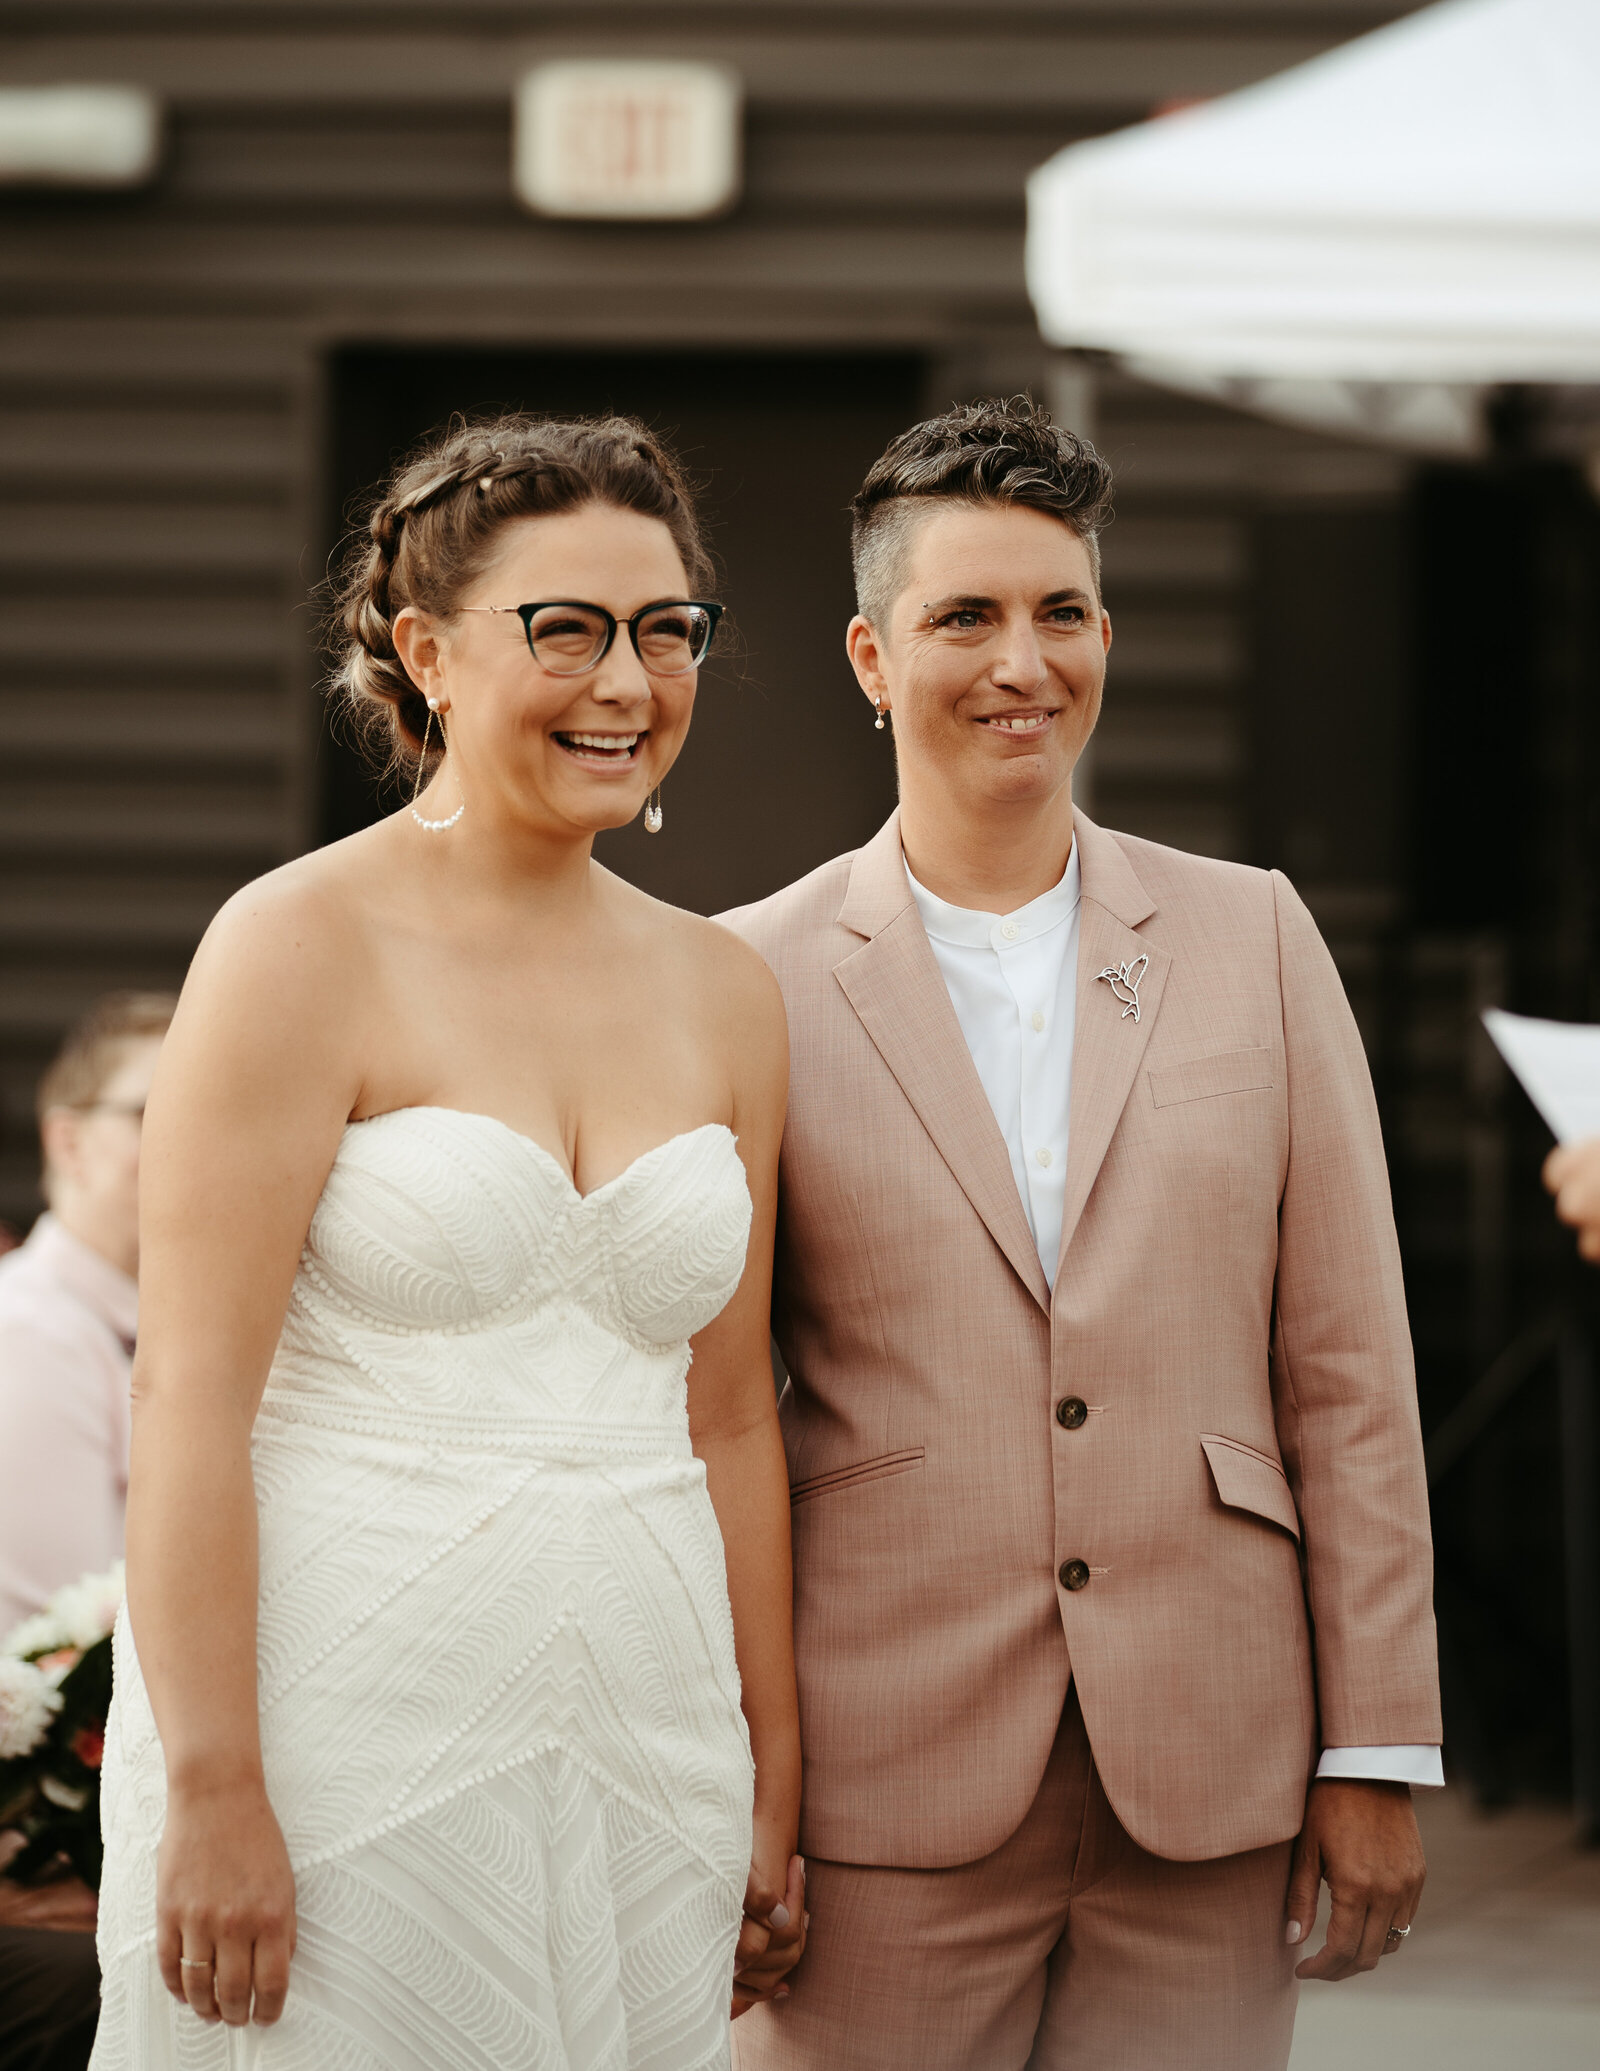 Two brides smiling and holding hands